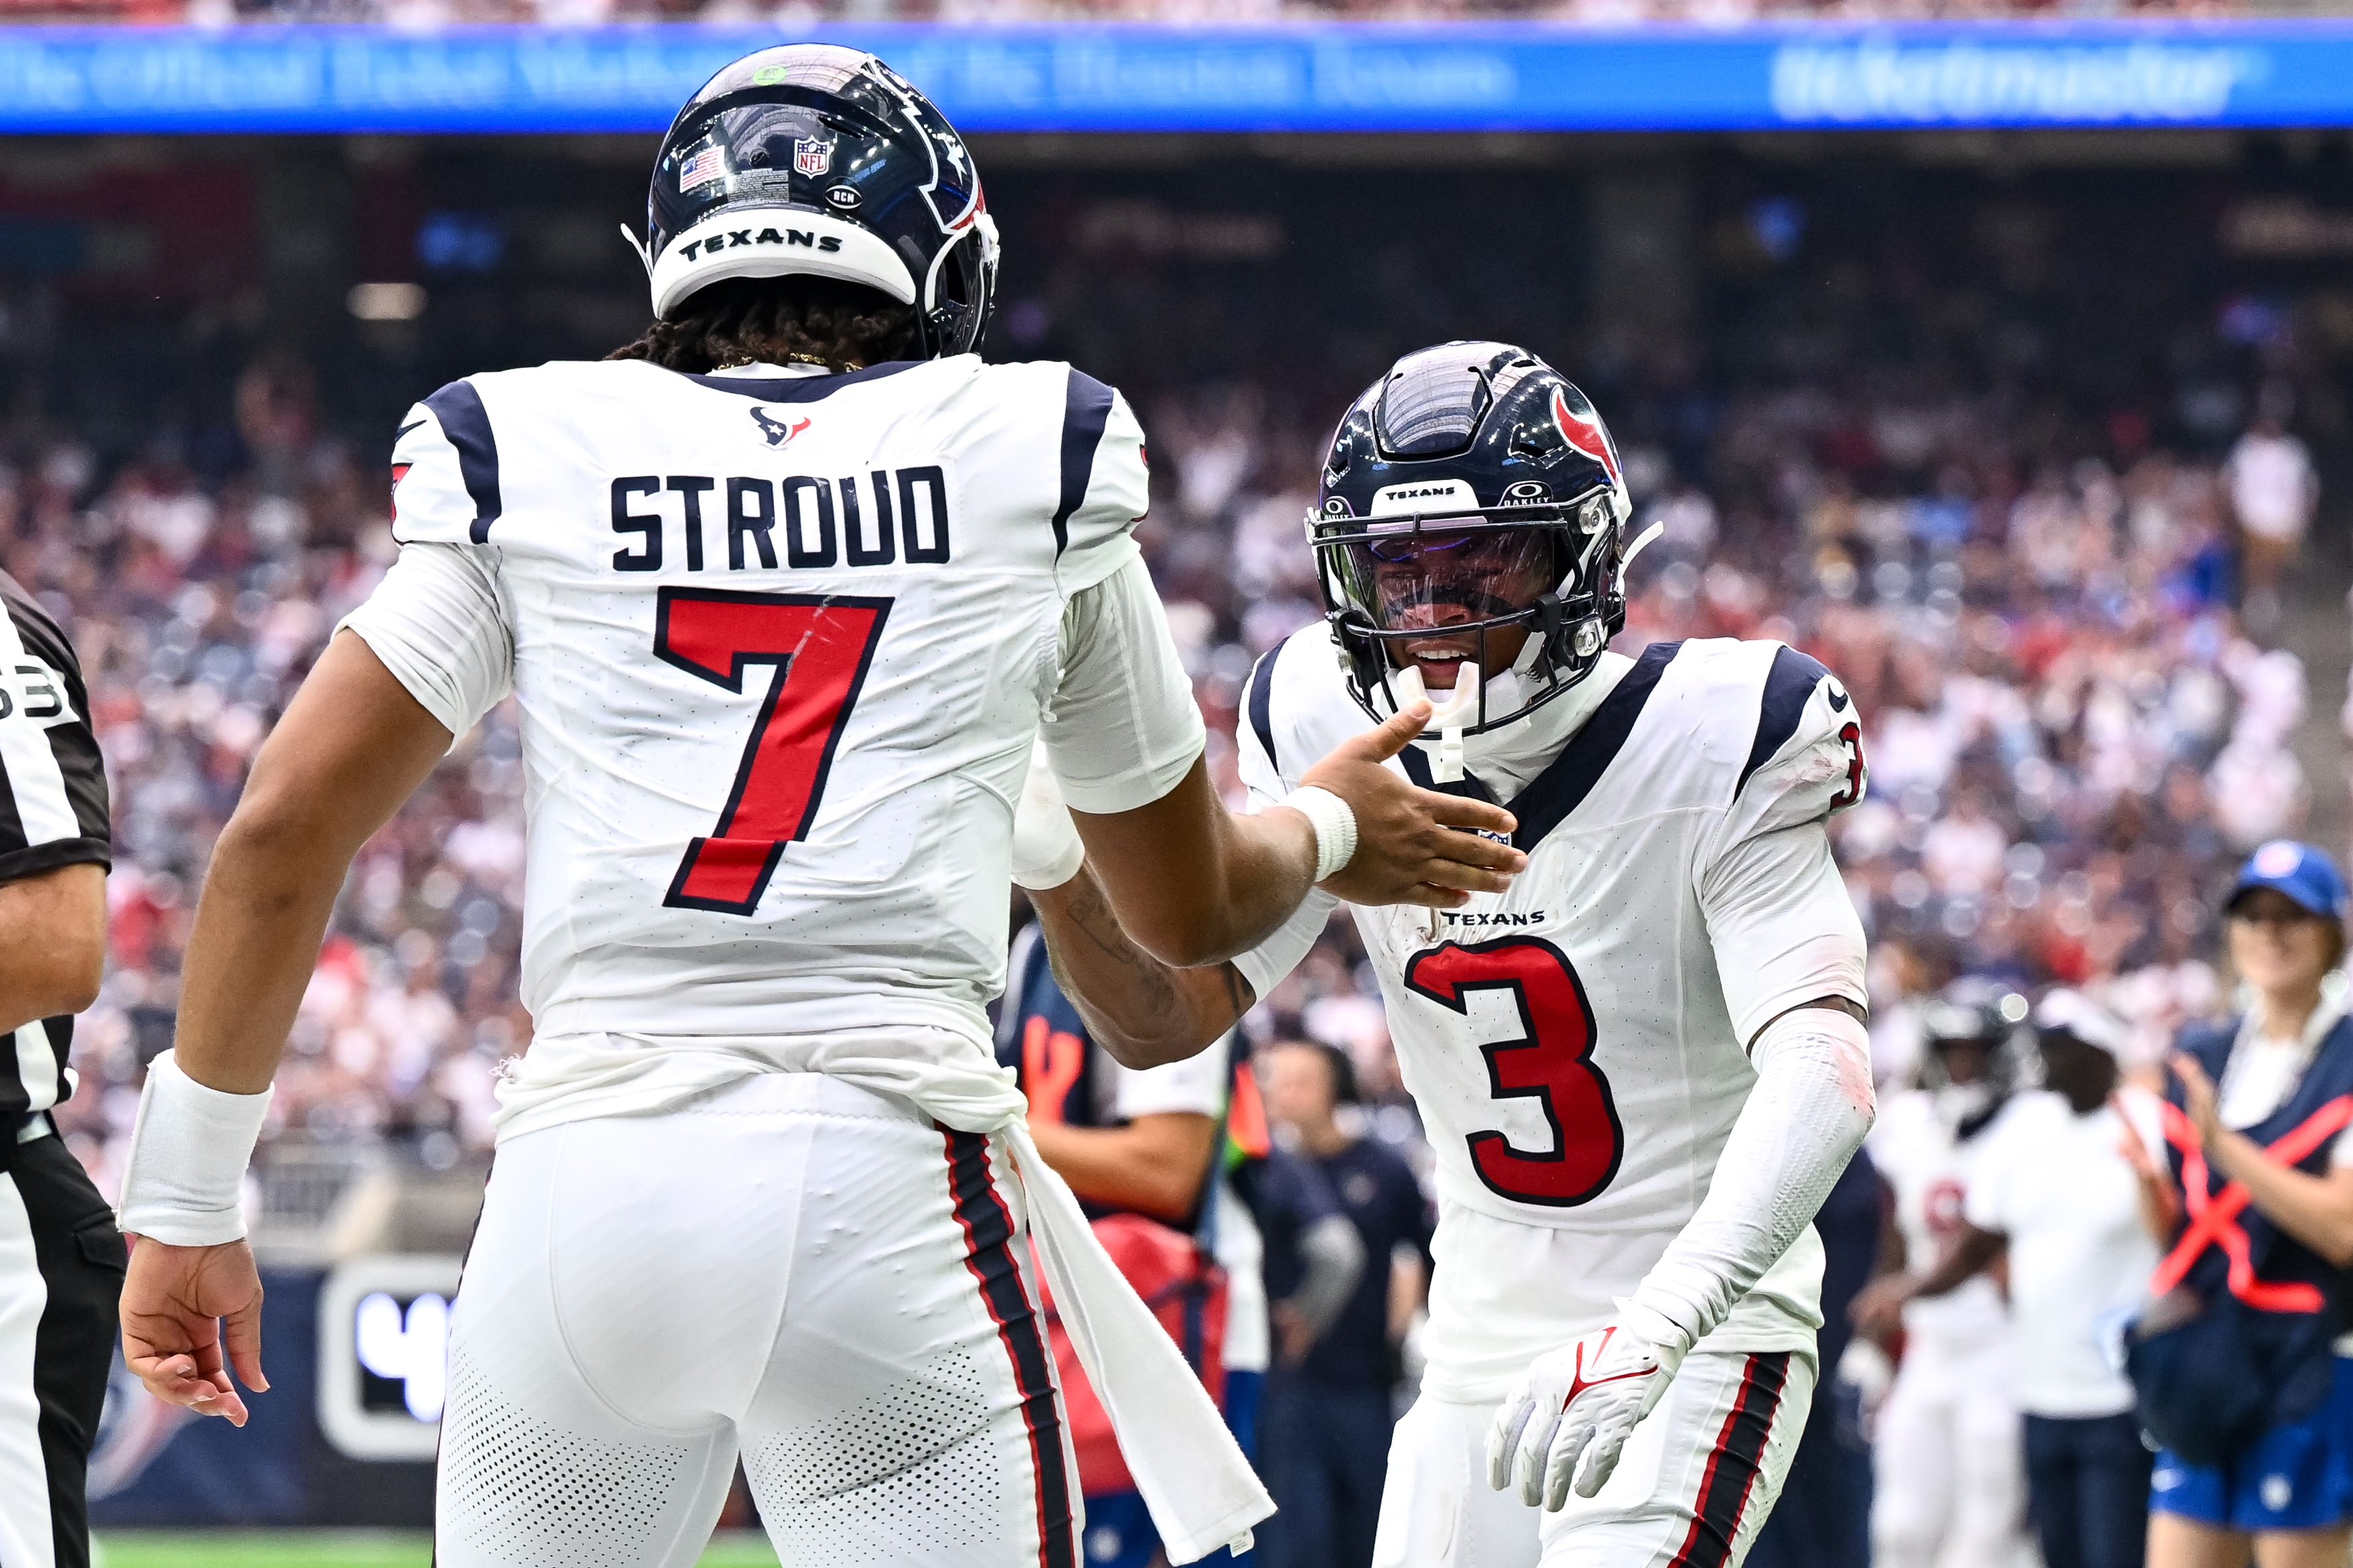 Fantasy Football QB-WR Stacks Today: Top DraftKings NFL DFS  Quarterback-Wide Receiver Picks for Week 3 - DraftKings Network